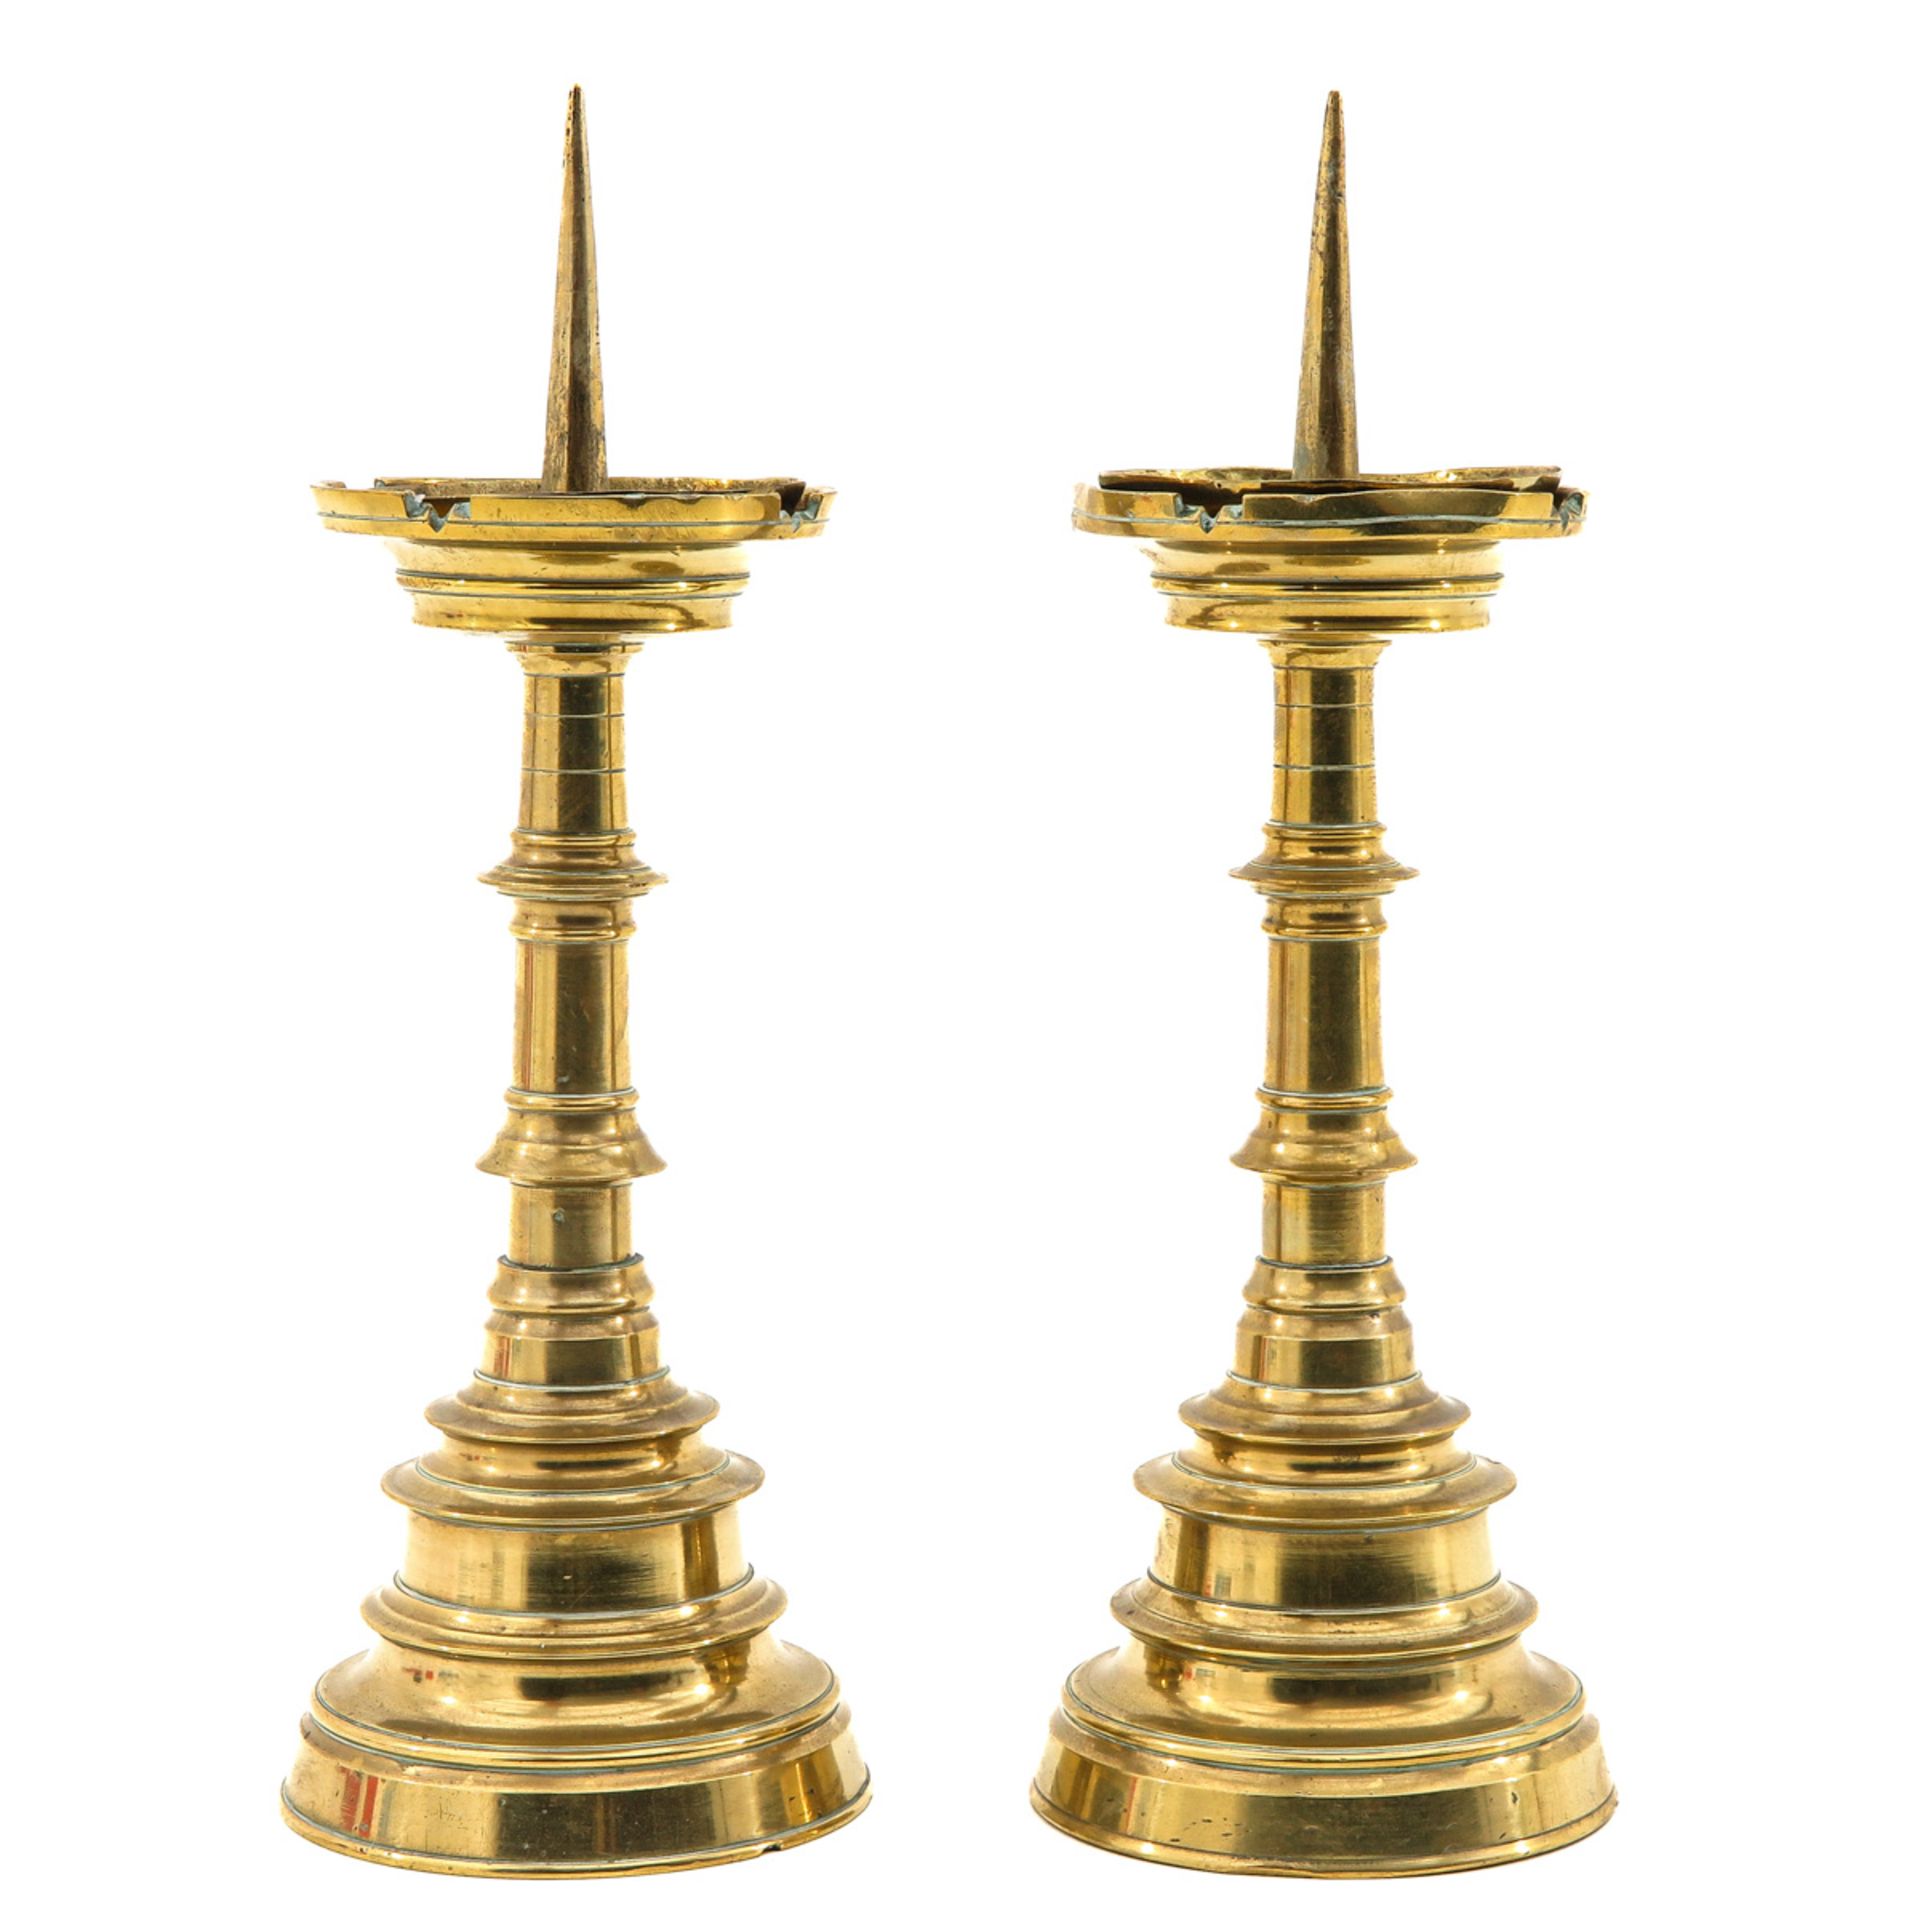 A Pair of Copper Candlesticks - Image 2 of 10